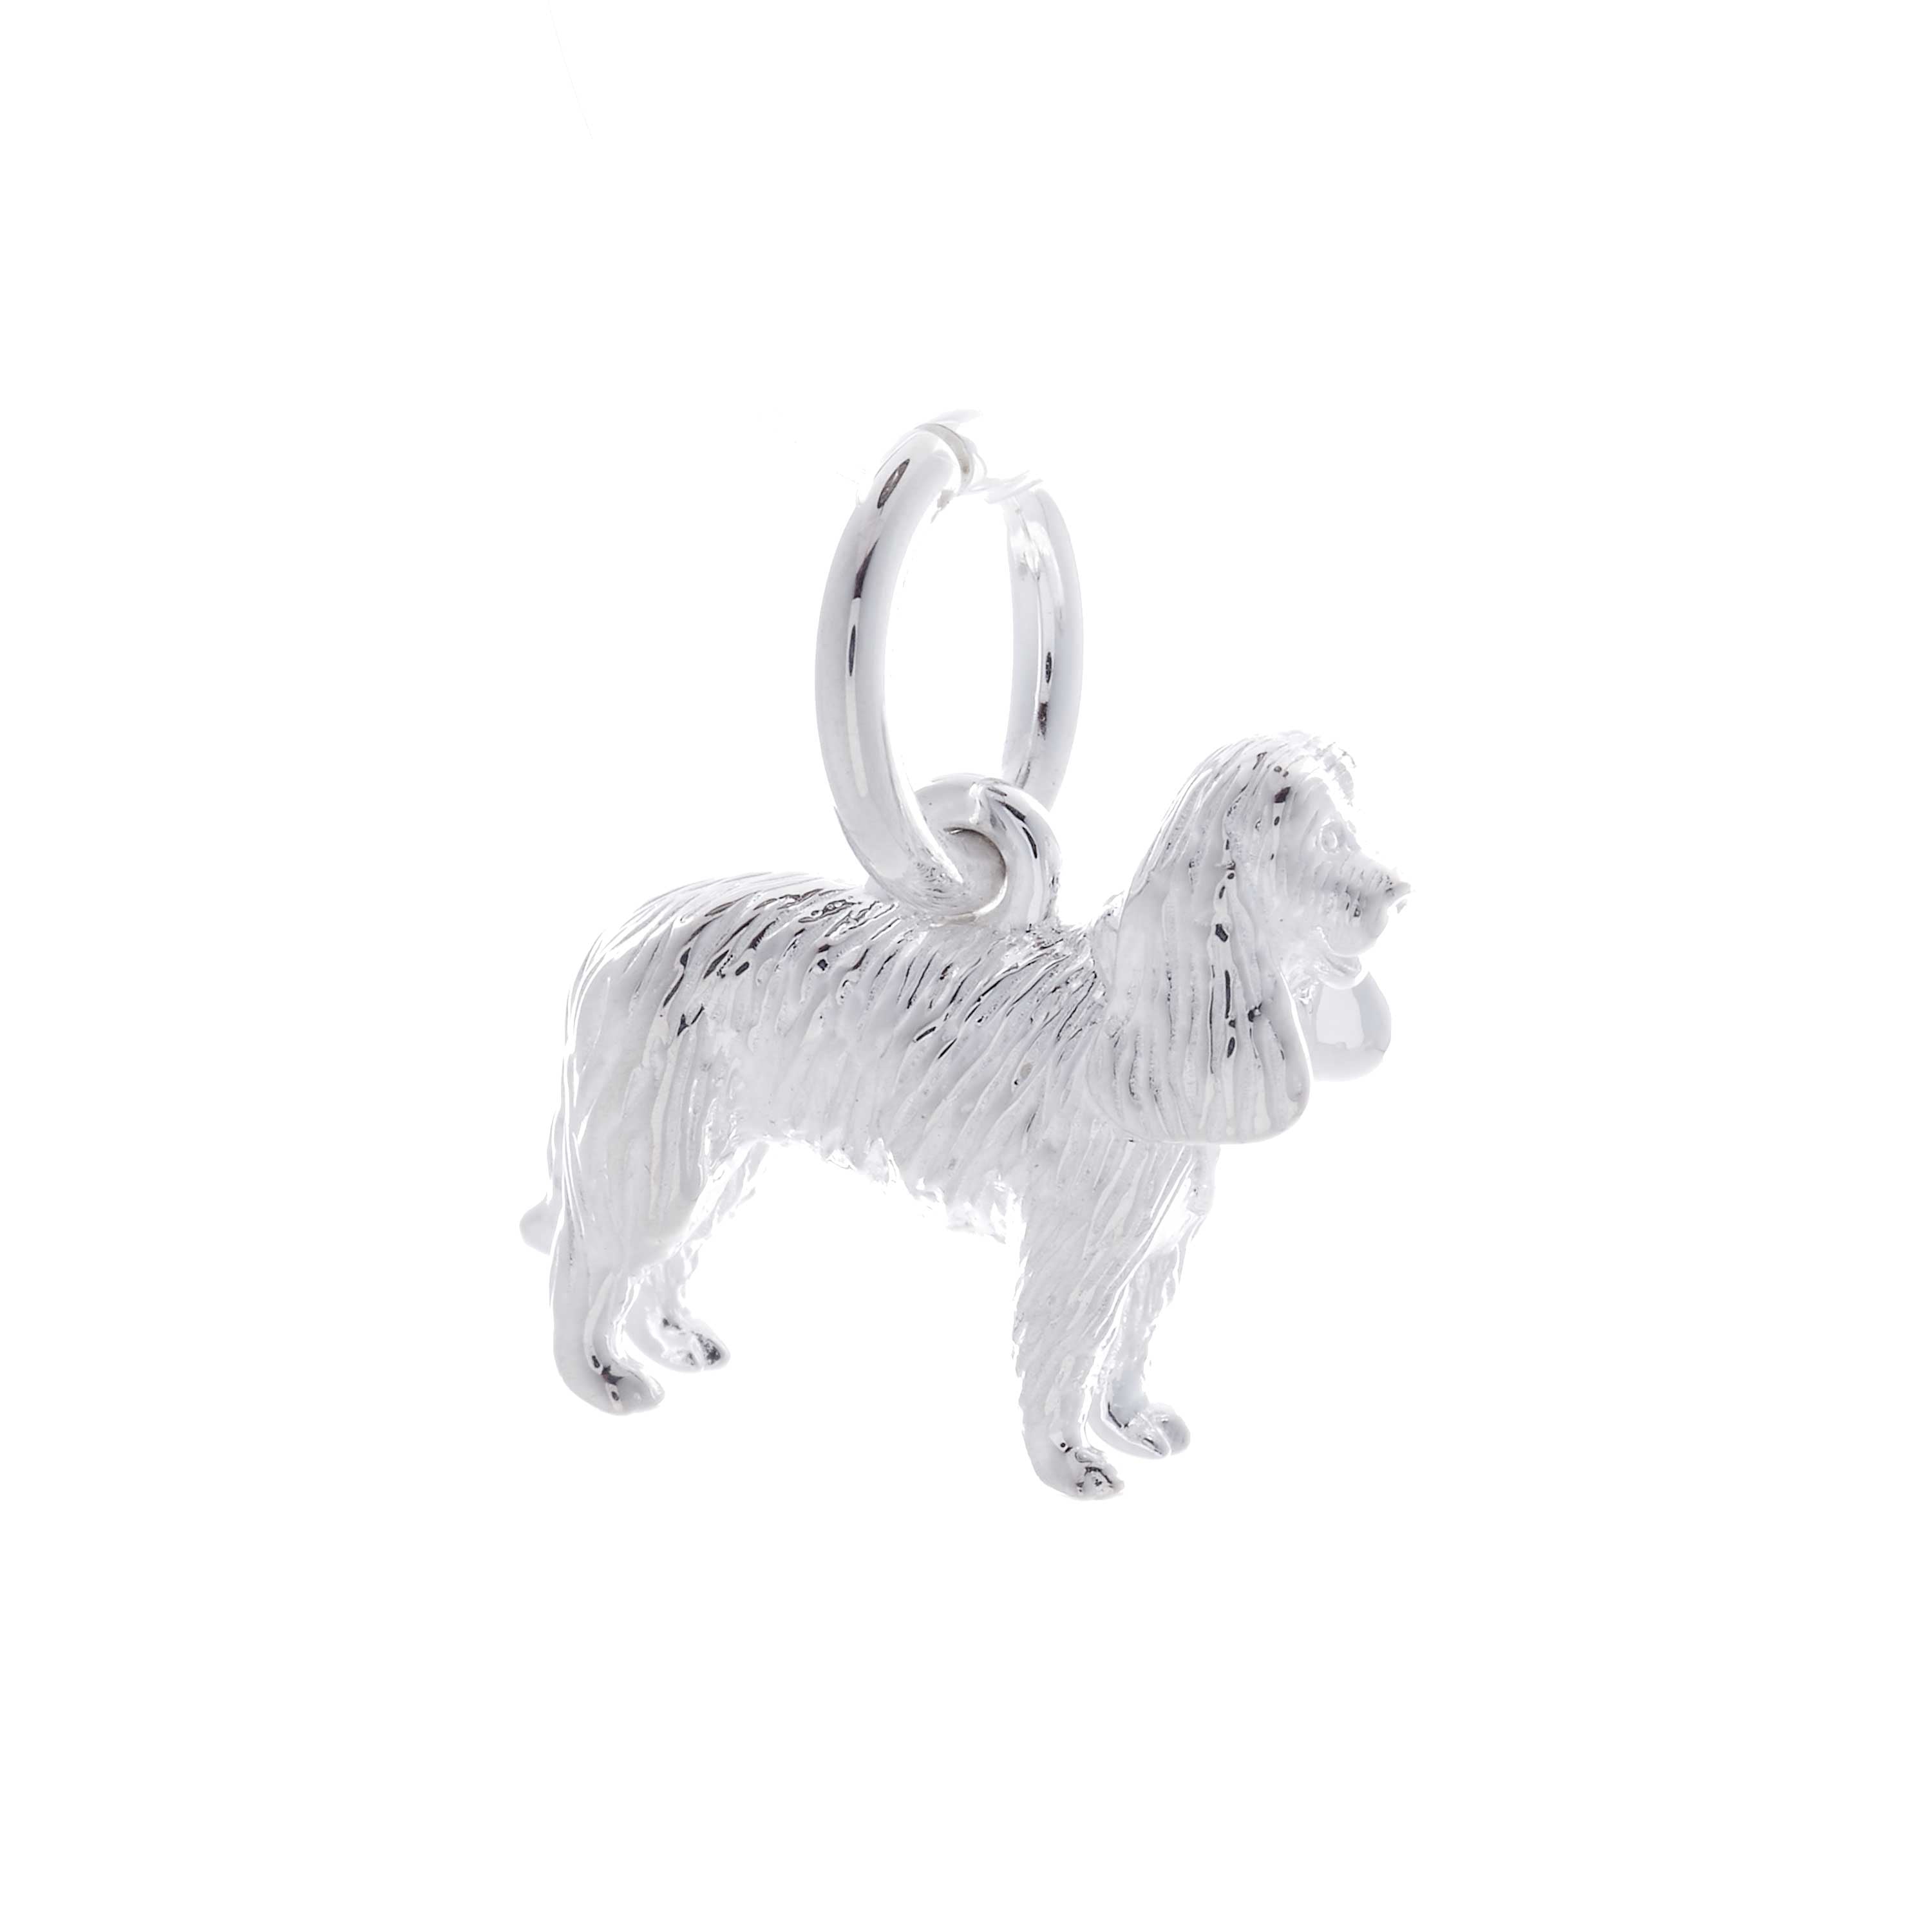 King charles spaniel silver dog charm necklace engraved gift from the dog pet loss Scarlett Jewellery UK